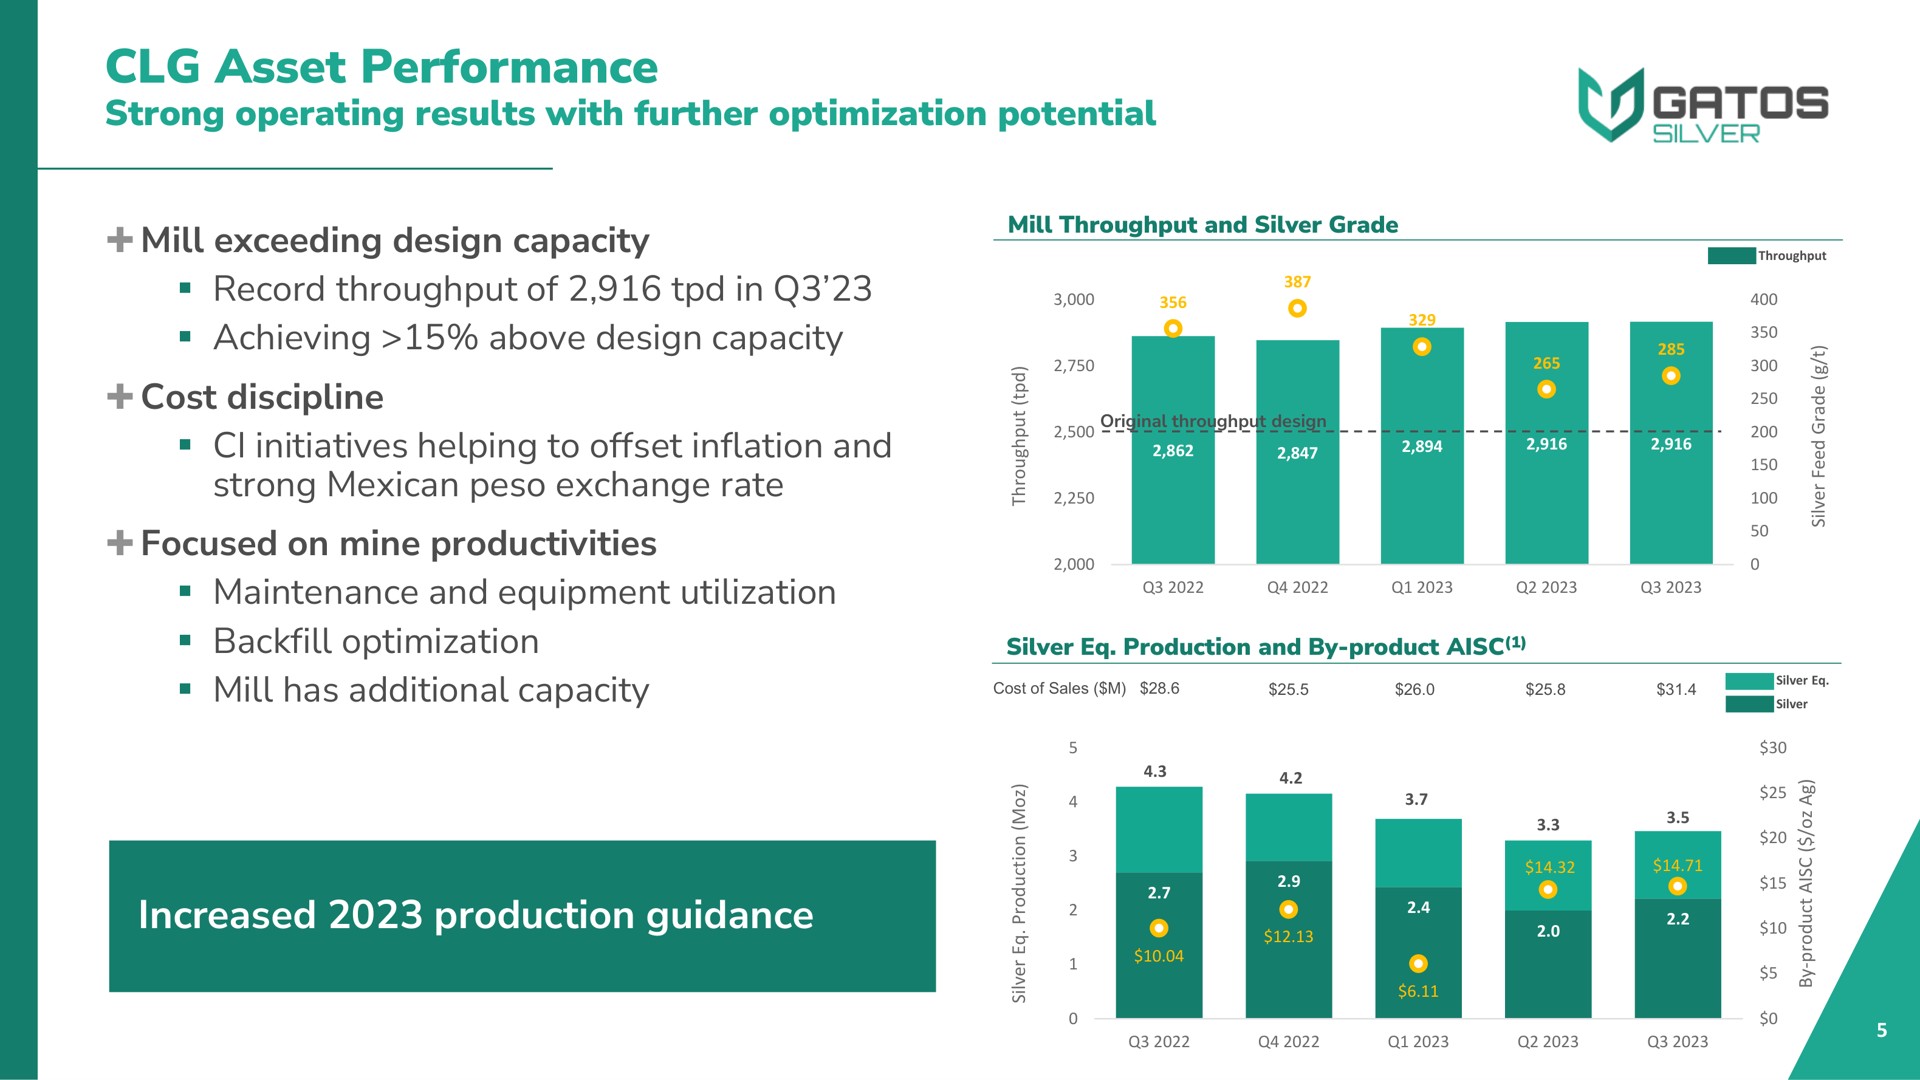 asset performance strong operating results with further optimization potential mill exceeding design capacity record throughput of in achieving above design capacity cost discipline initiatives helping to offset inflation and strong peso exchange rate focused on mine productivities maintenance and equipment utilization backfill optimization mill has additional capacity increased production guidance sales sas | Gatos Silver